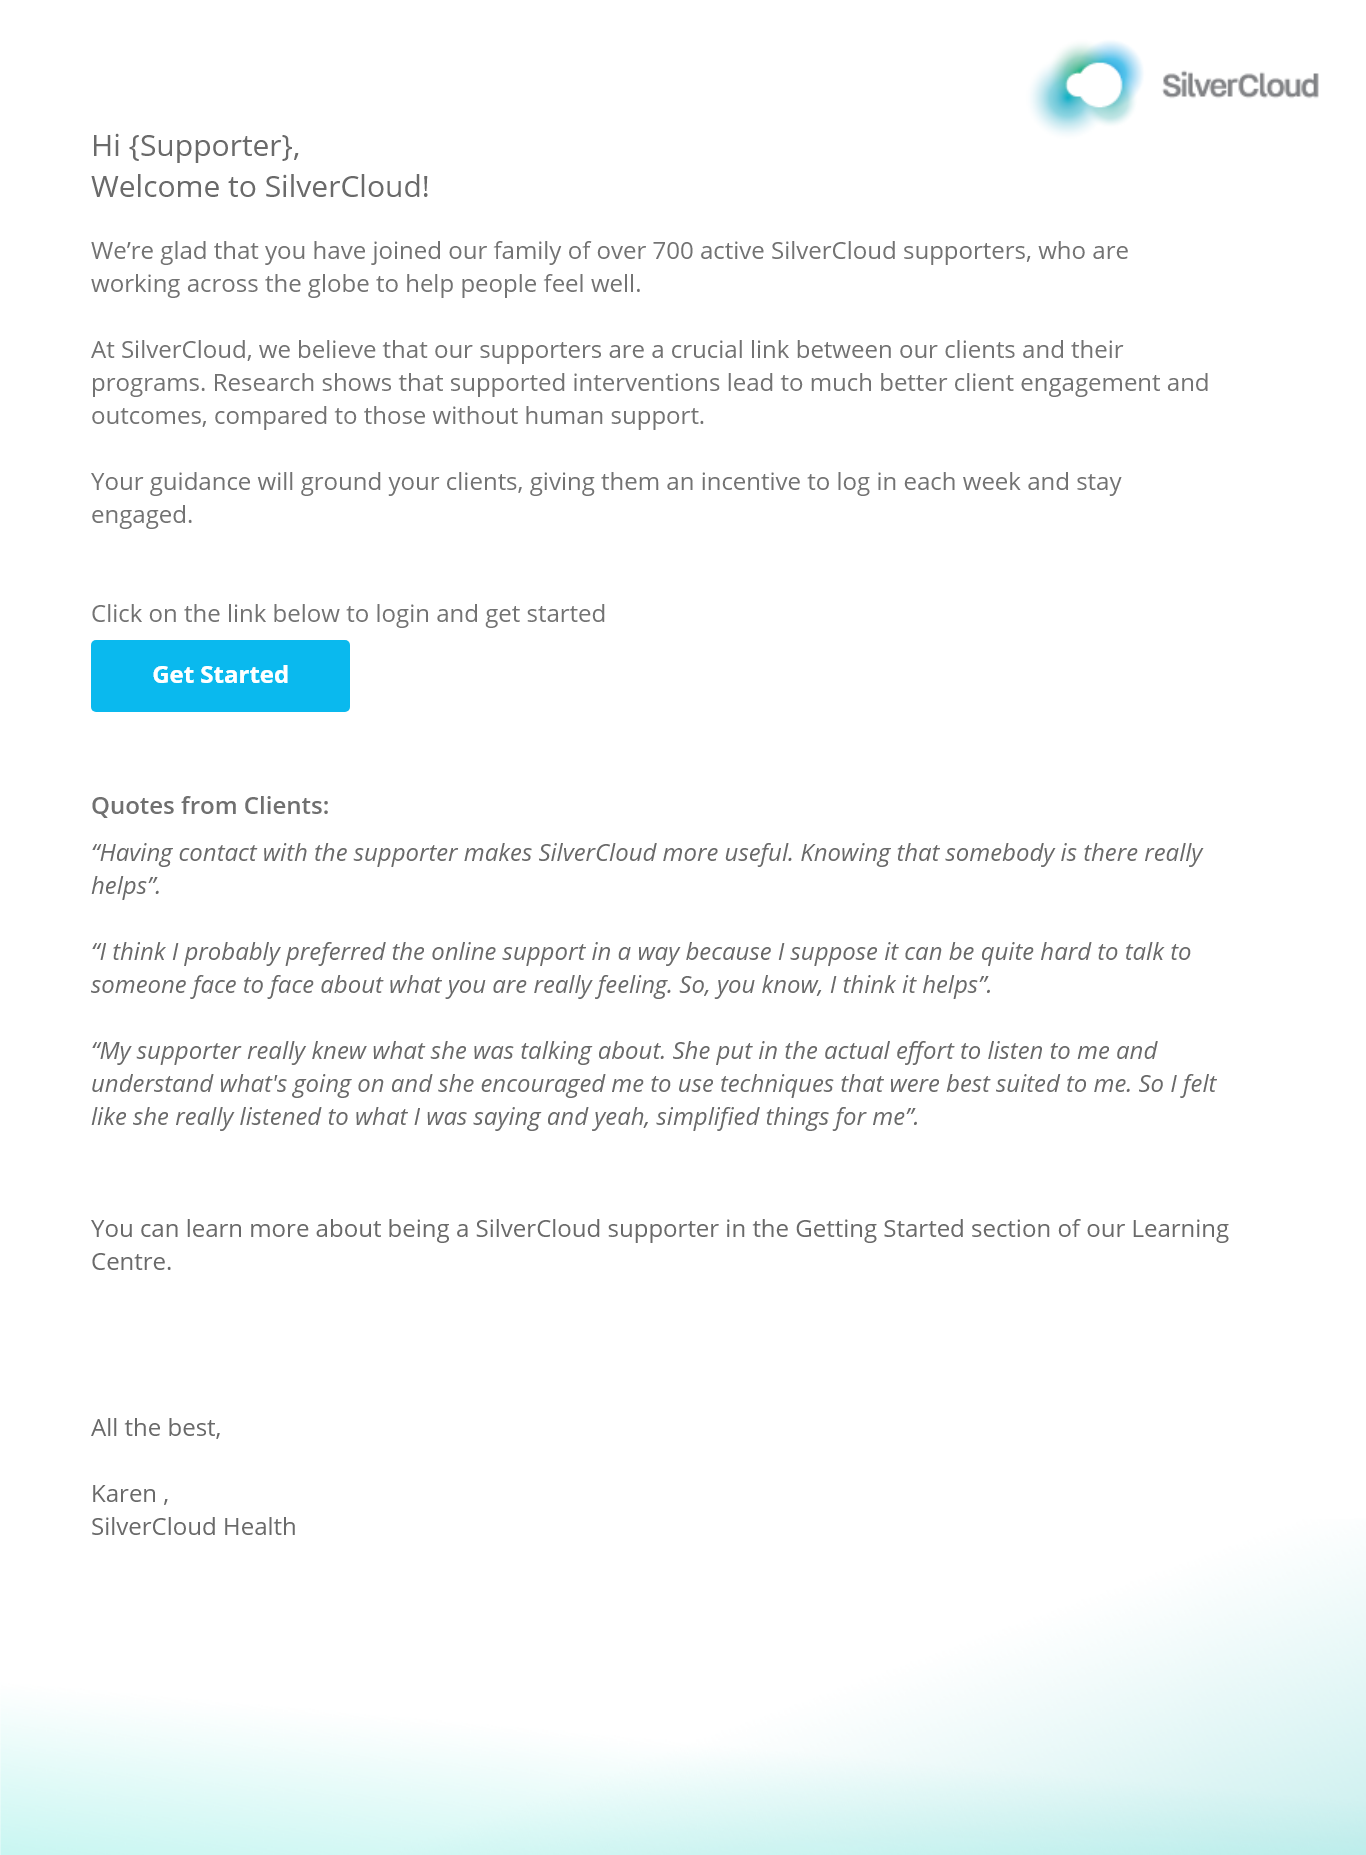 A SilverCloud welcome email written to new supporters.